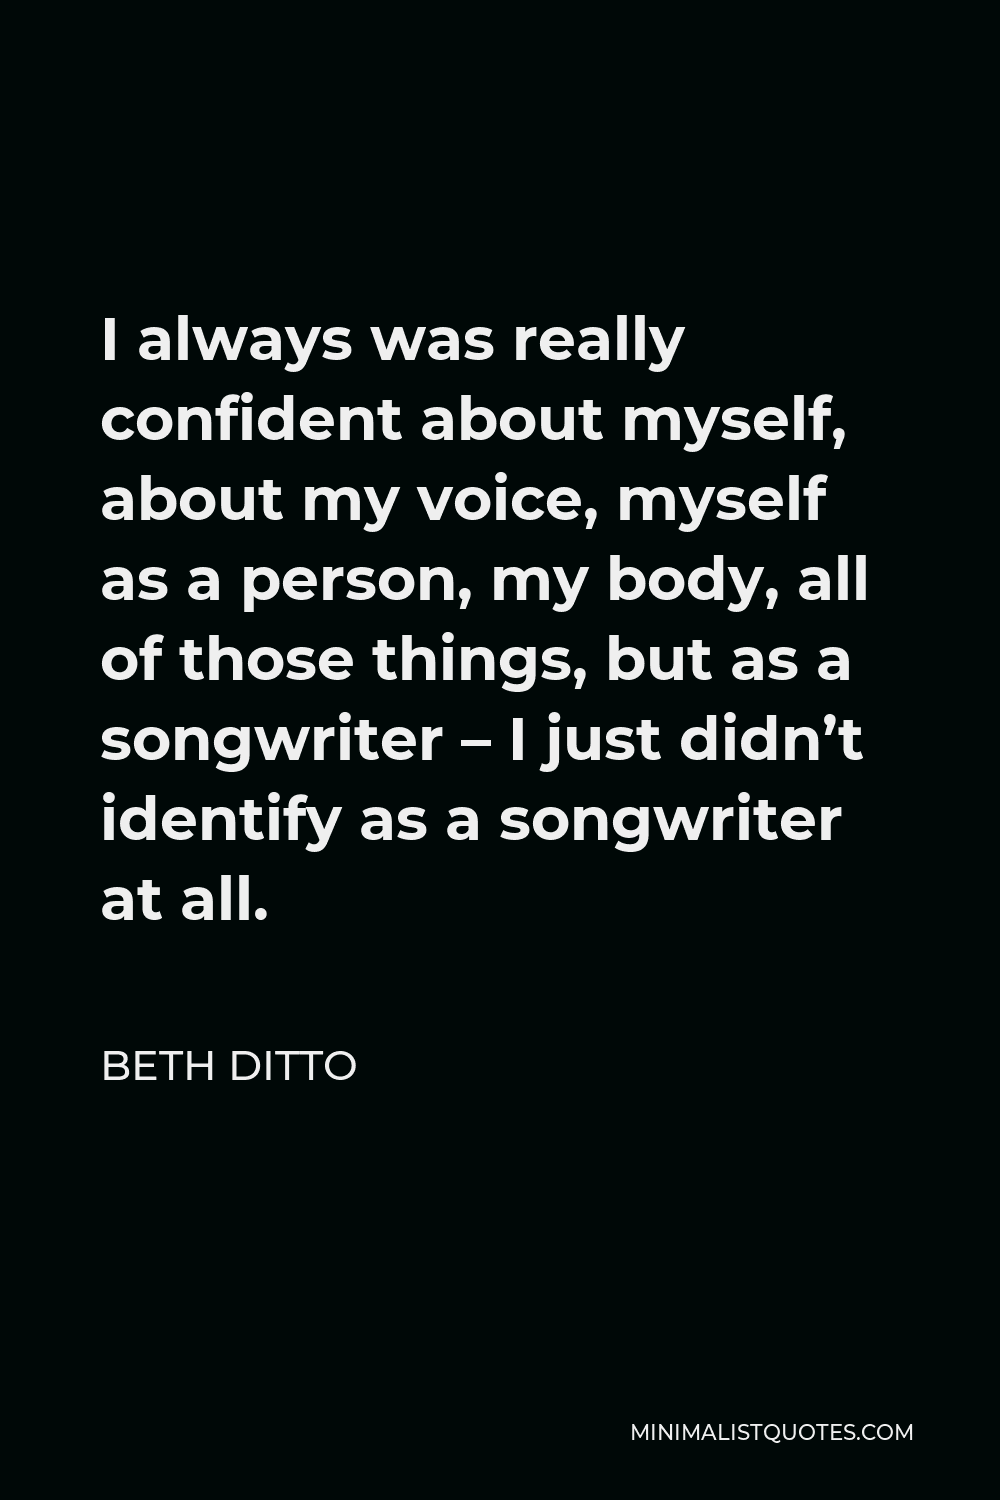 Beth Ditto Quote - I always was really confident about myself, about my voice, myself as a person, my body, all of those things, but as a songwriter – I just didn’t identify as a songwriter at all.